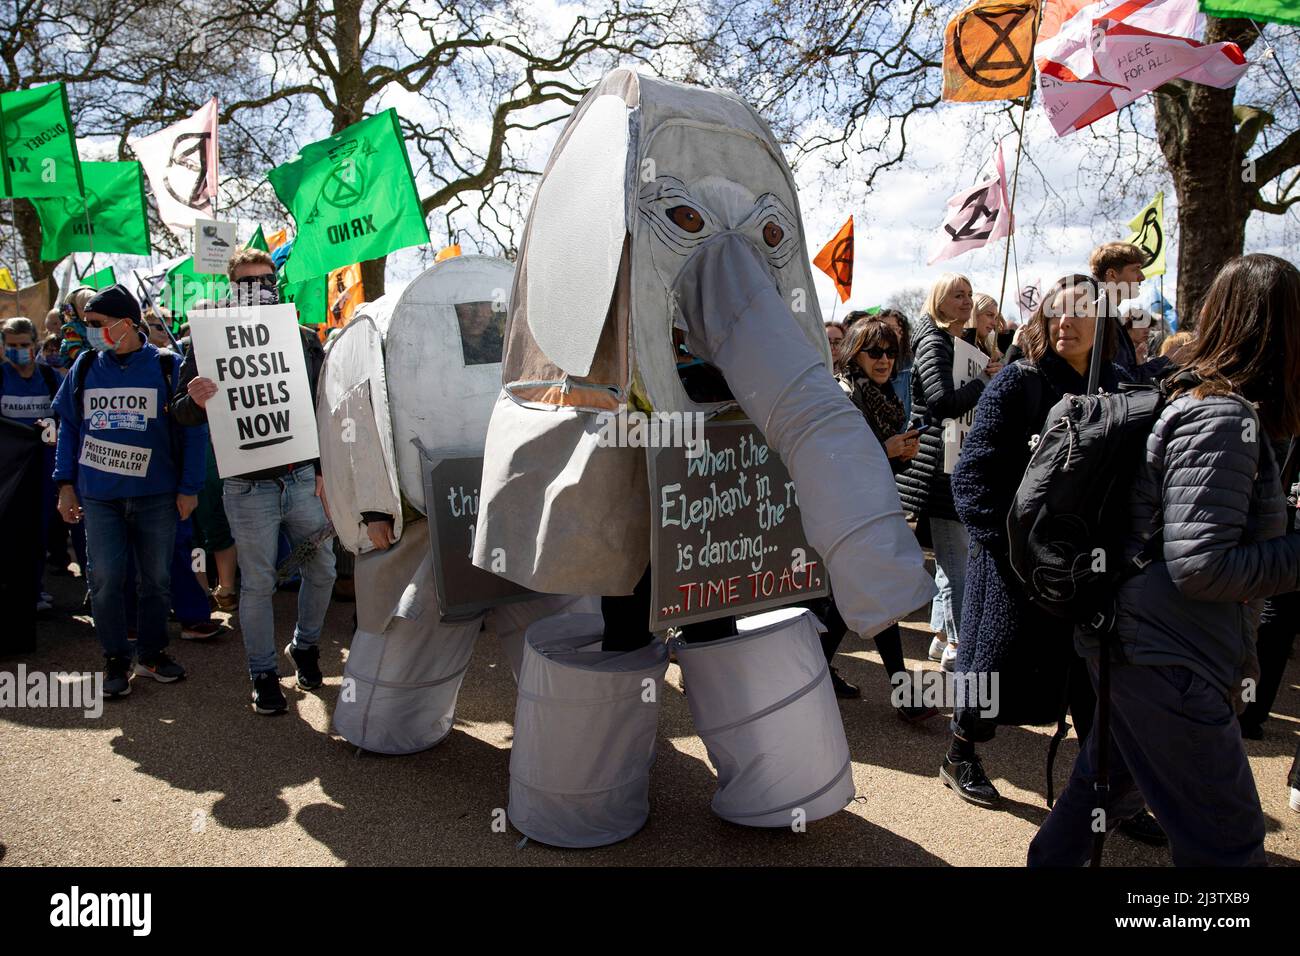 Protesters dressed in an elephant costume to mock the delay of action of the government in tackling climate emergency seen during the demonstration. Climate change protest group Extinction Rebellion calls on a new round of a series of protests over Easter holidays to push for ending the use of fossil fuels. The protesters demands an immediate end to all new fossil fuel investments as the reliance on fossil fuels is funding Russia-Ukraine War, contributing to the cost of living crisis, and leading to the climate breakdown. (Photo by Hesther Ng/SOPA Images/Sipa USA) Stock Photo